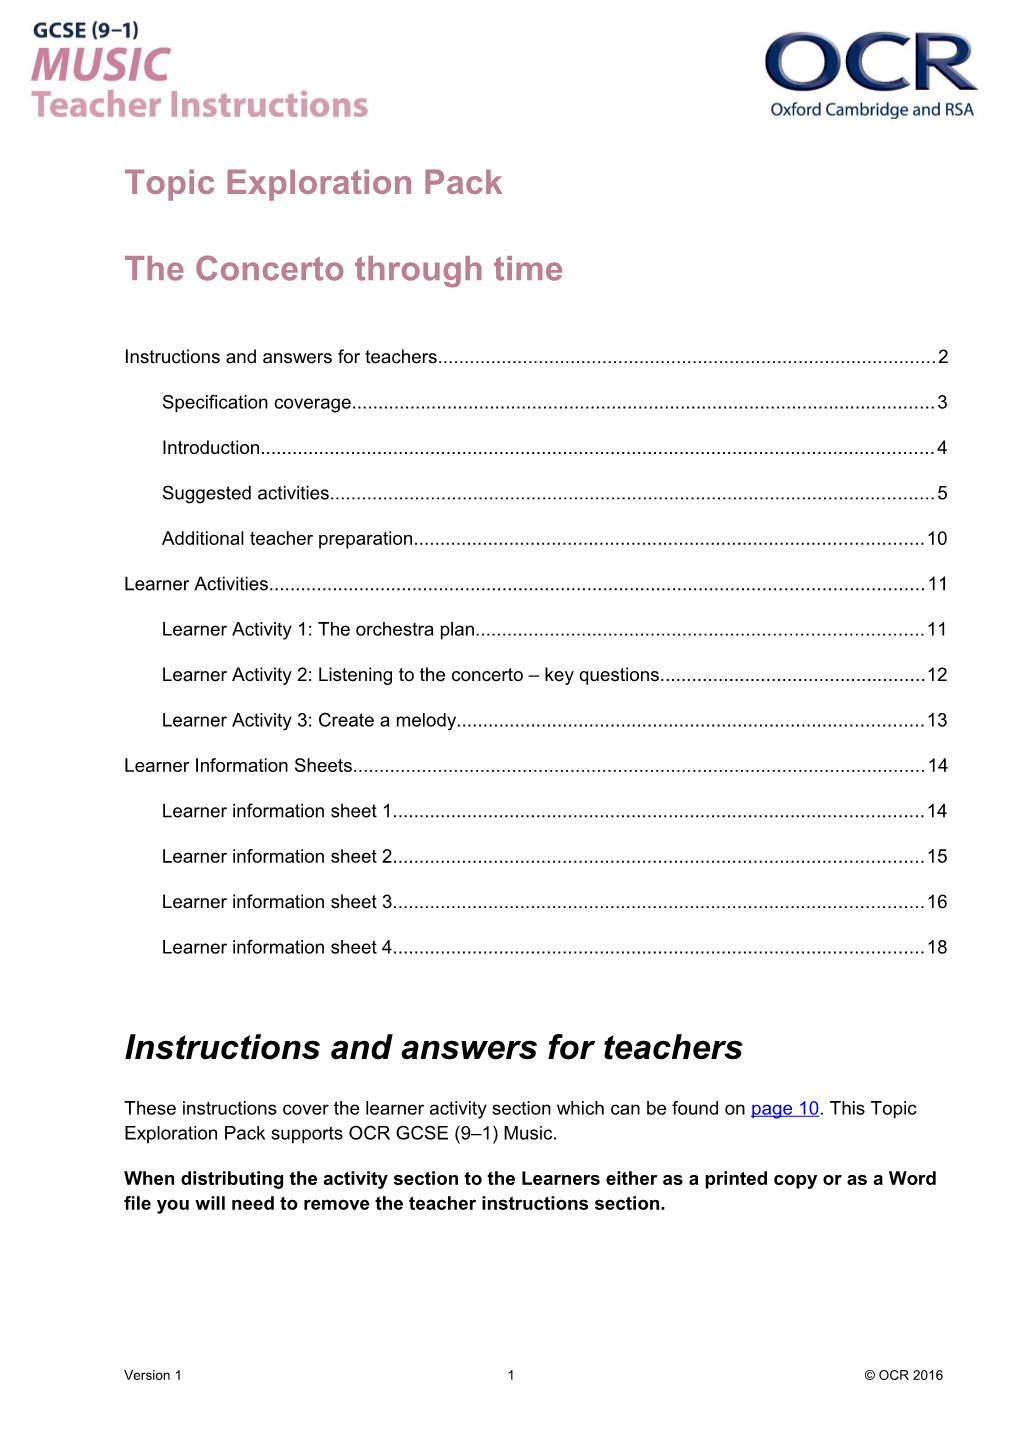 OCR GCSE (9-1) Music Topic Exploration Pack - the Concerto Through Time